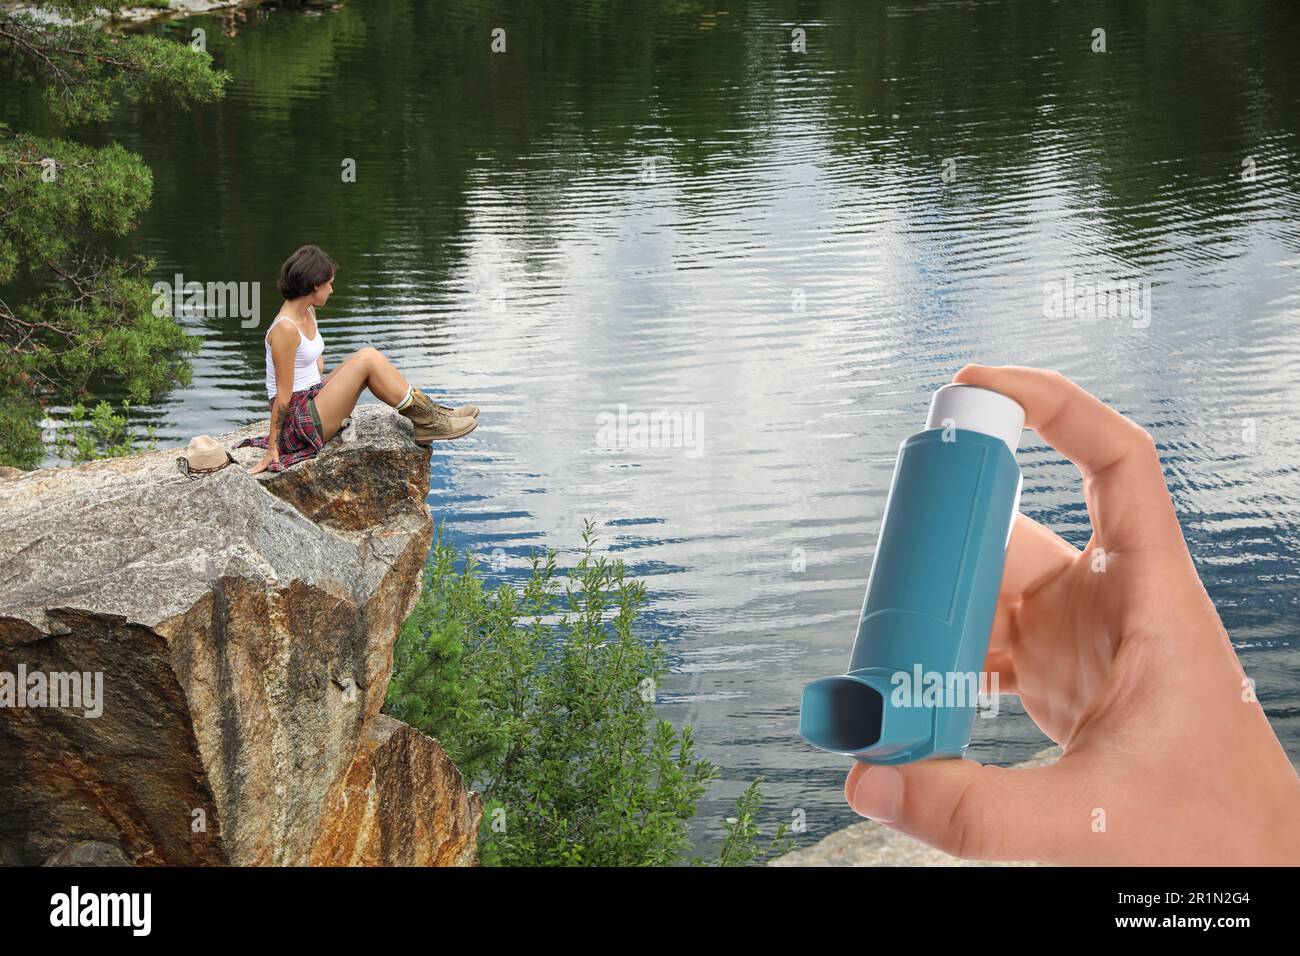 Man with asthma inhaler near lake, closeup. Emergency first aid during outdoor recreation Stock Photo